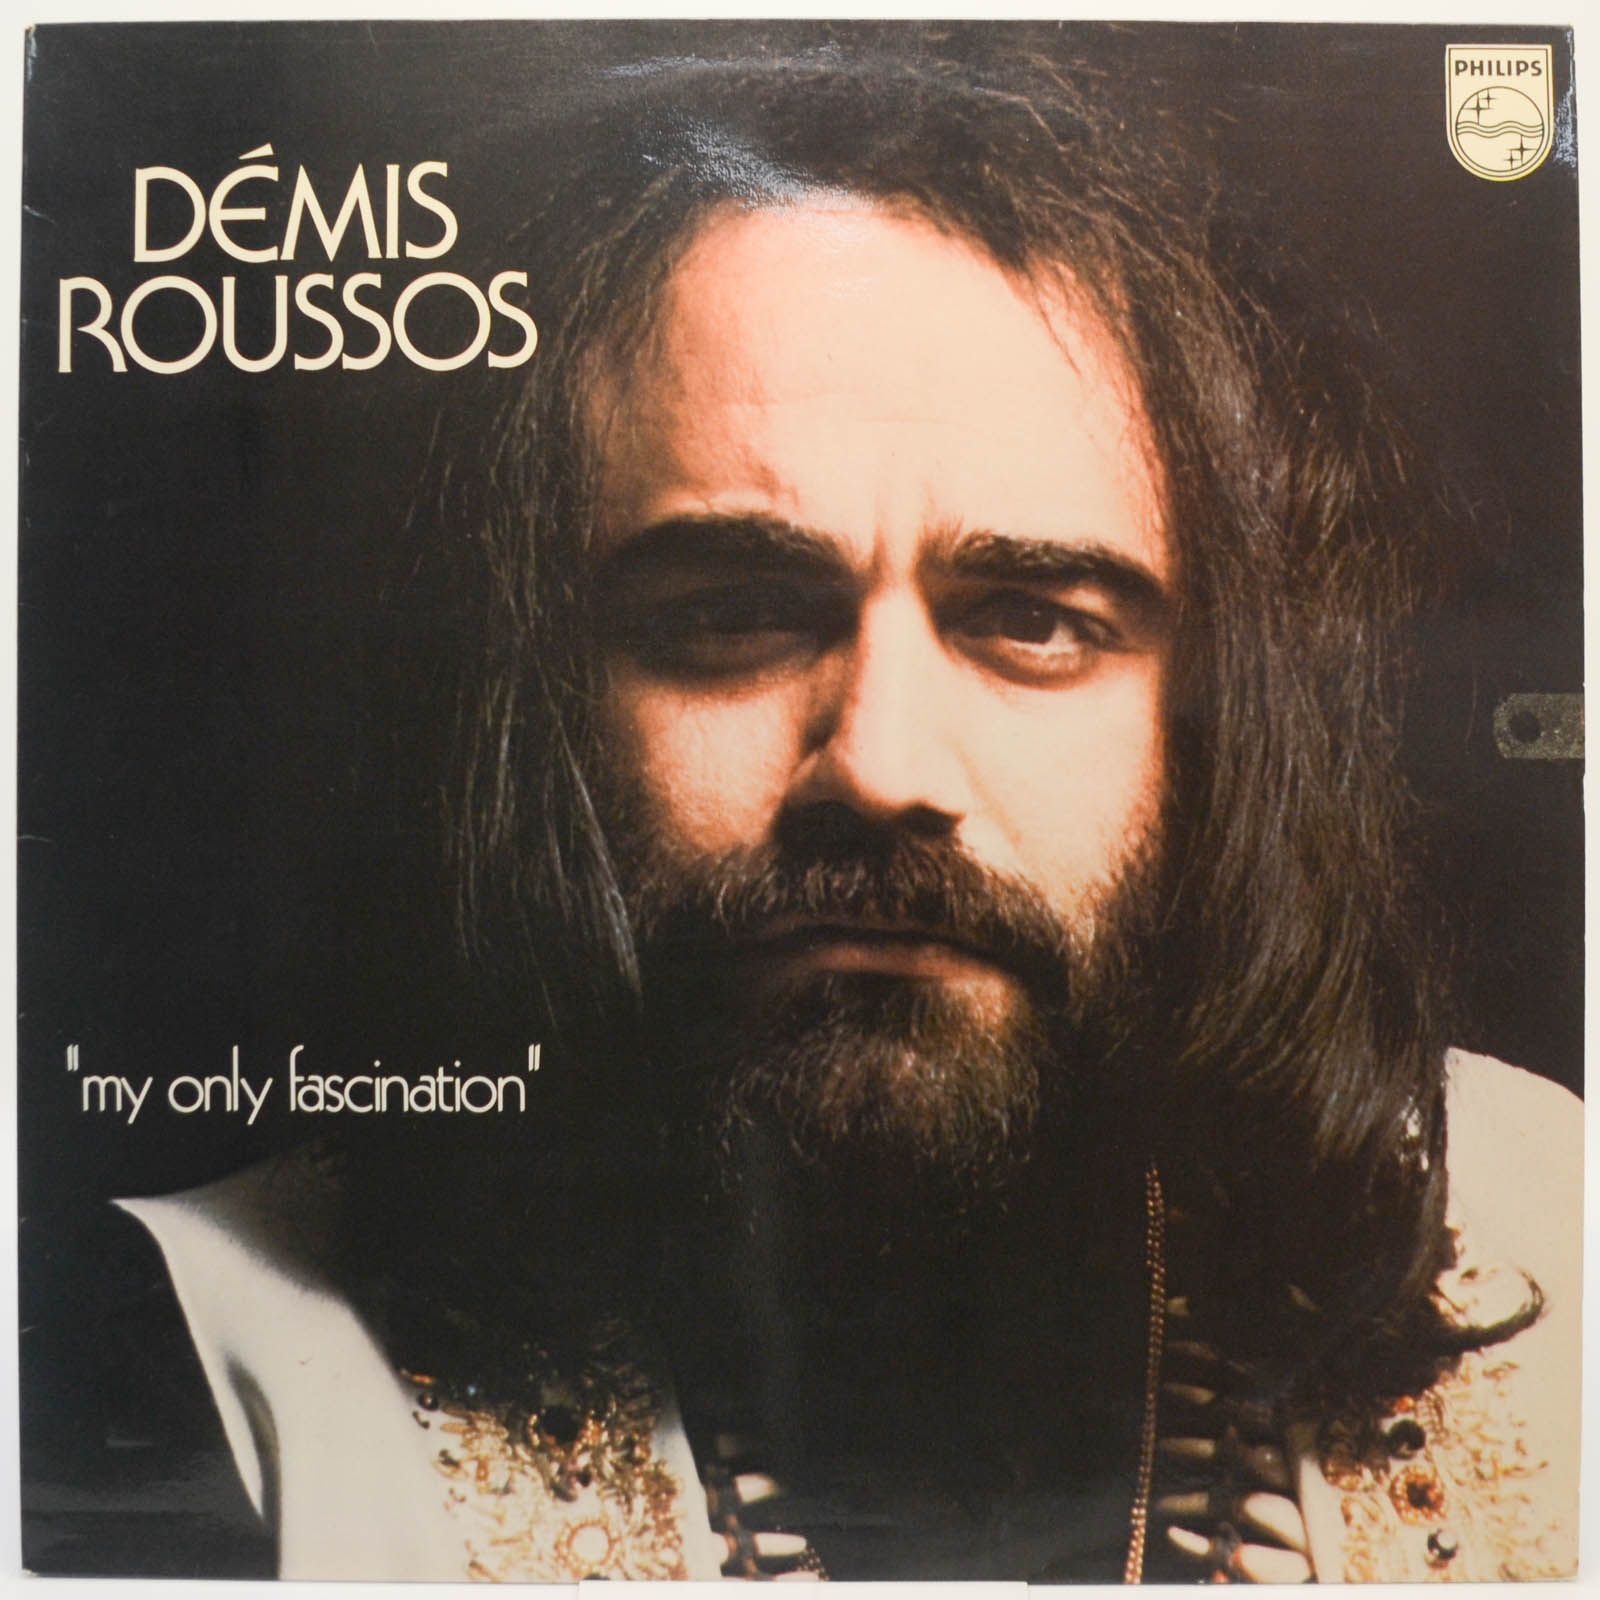 Démis Roussos — My Only Fascination, 1974